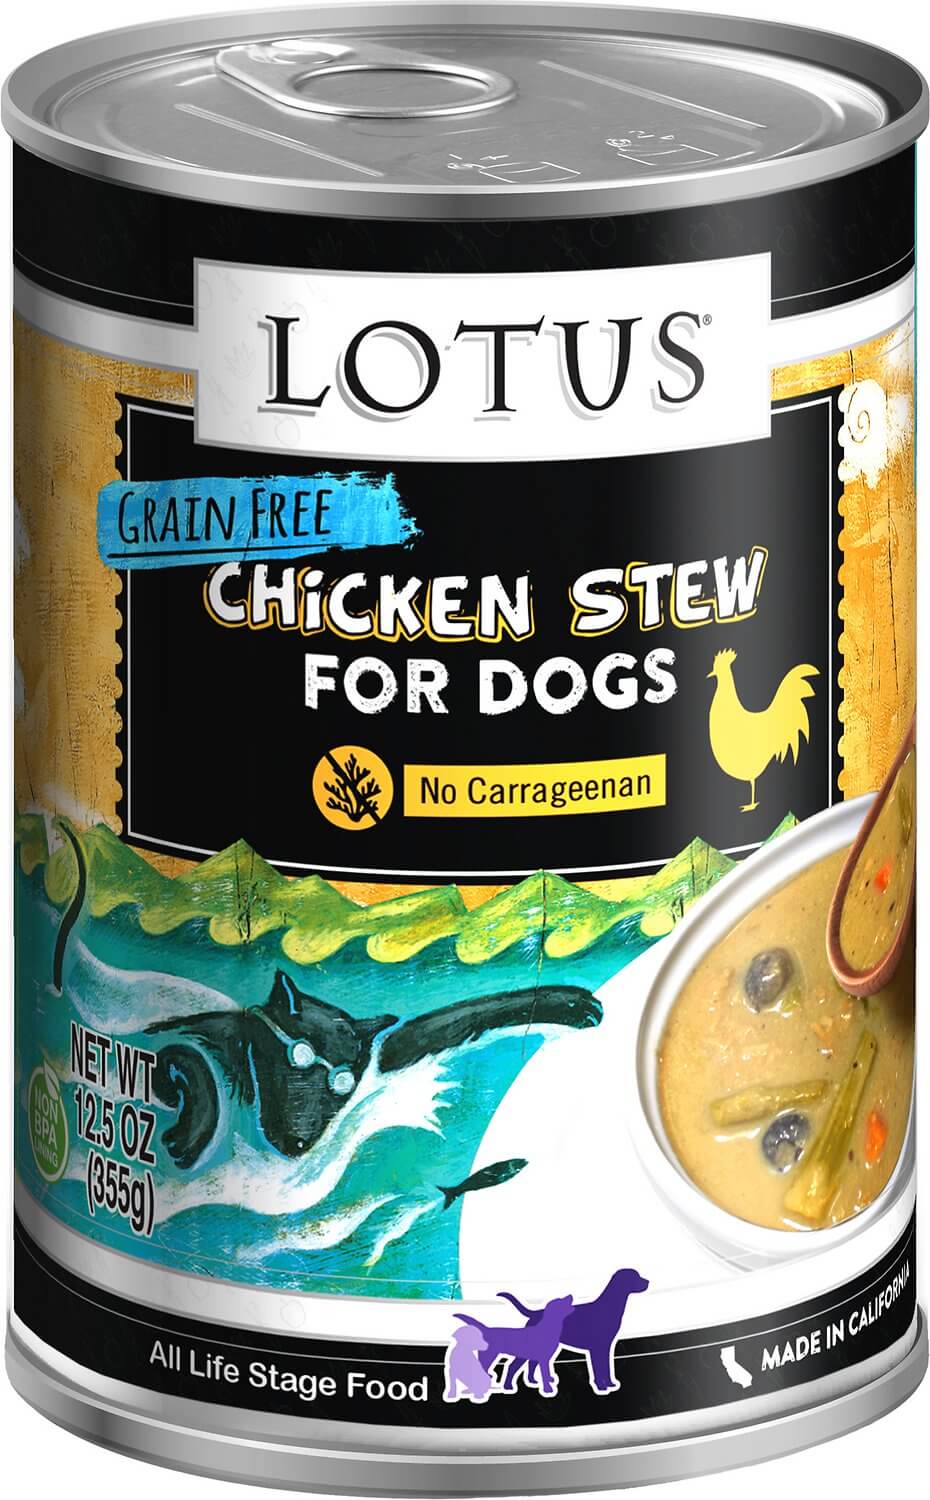 Lotus Stews Dog Food Review (Canned)